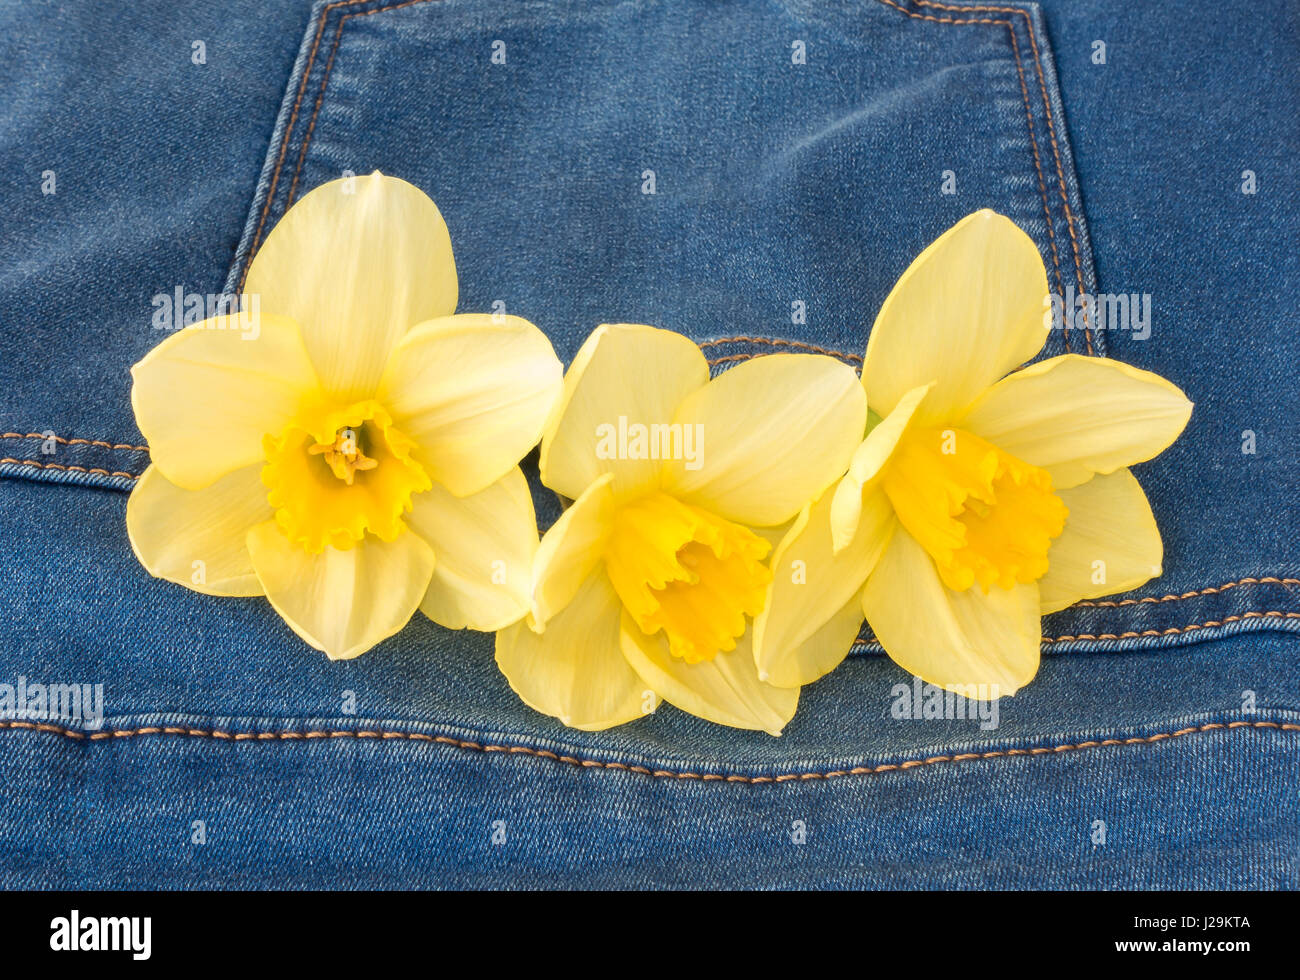 Closeup of three beautiful yellow narcissus flowers in a new blue denim jeans pocket with copy space. Stock Photo